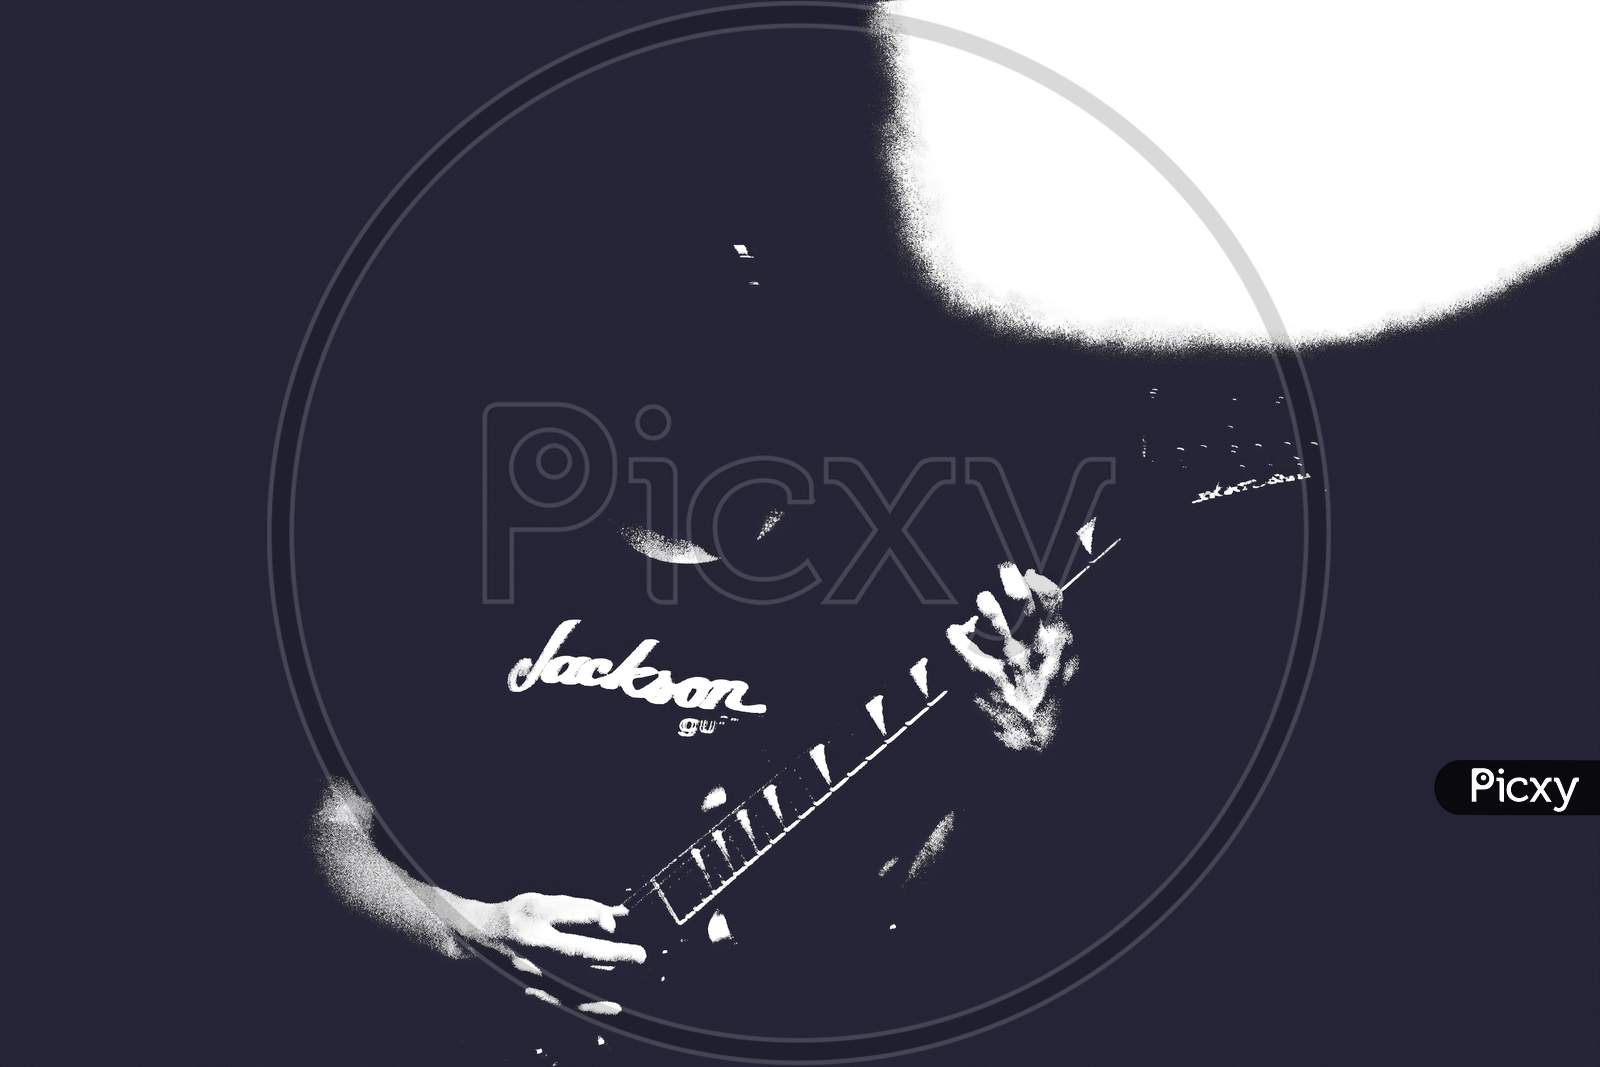 Krakow, Poland - September 20, 2014: Abstract Background Art Of An Artist Playing Electric Guitar In A Rock Band Music Concert Performance